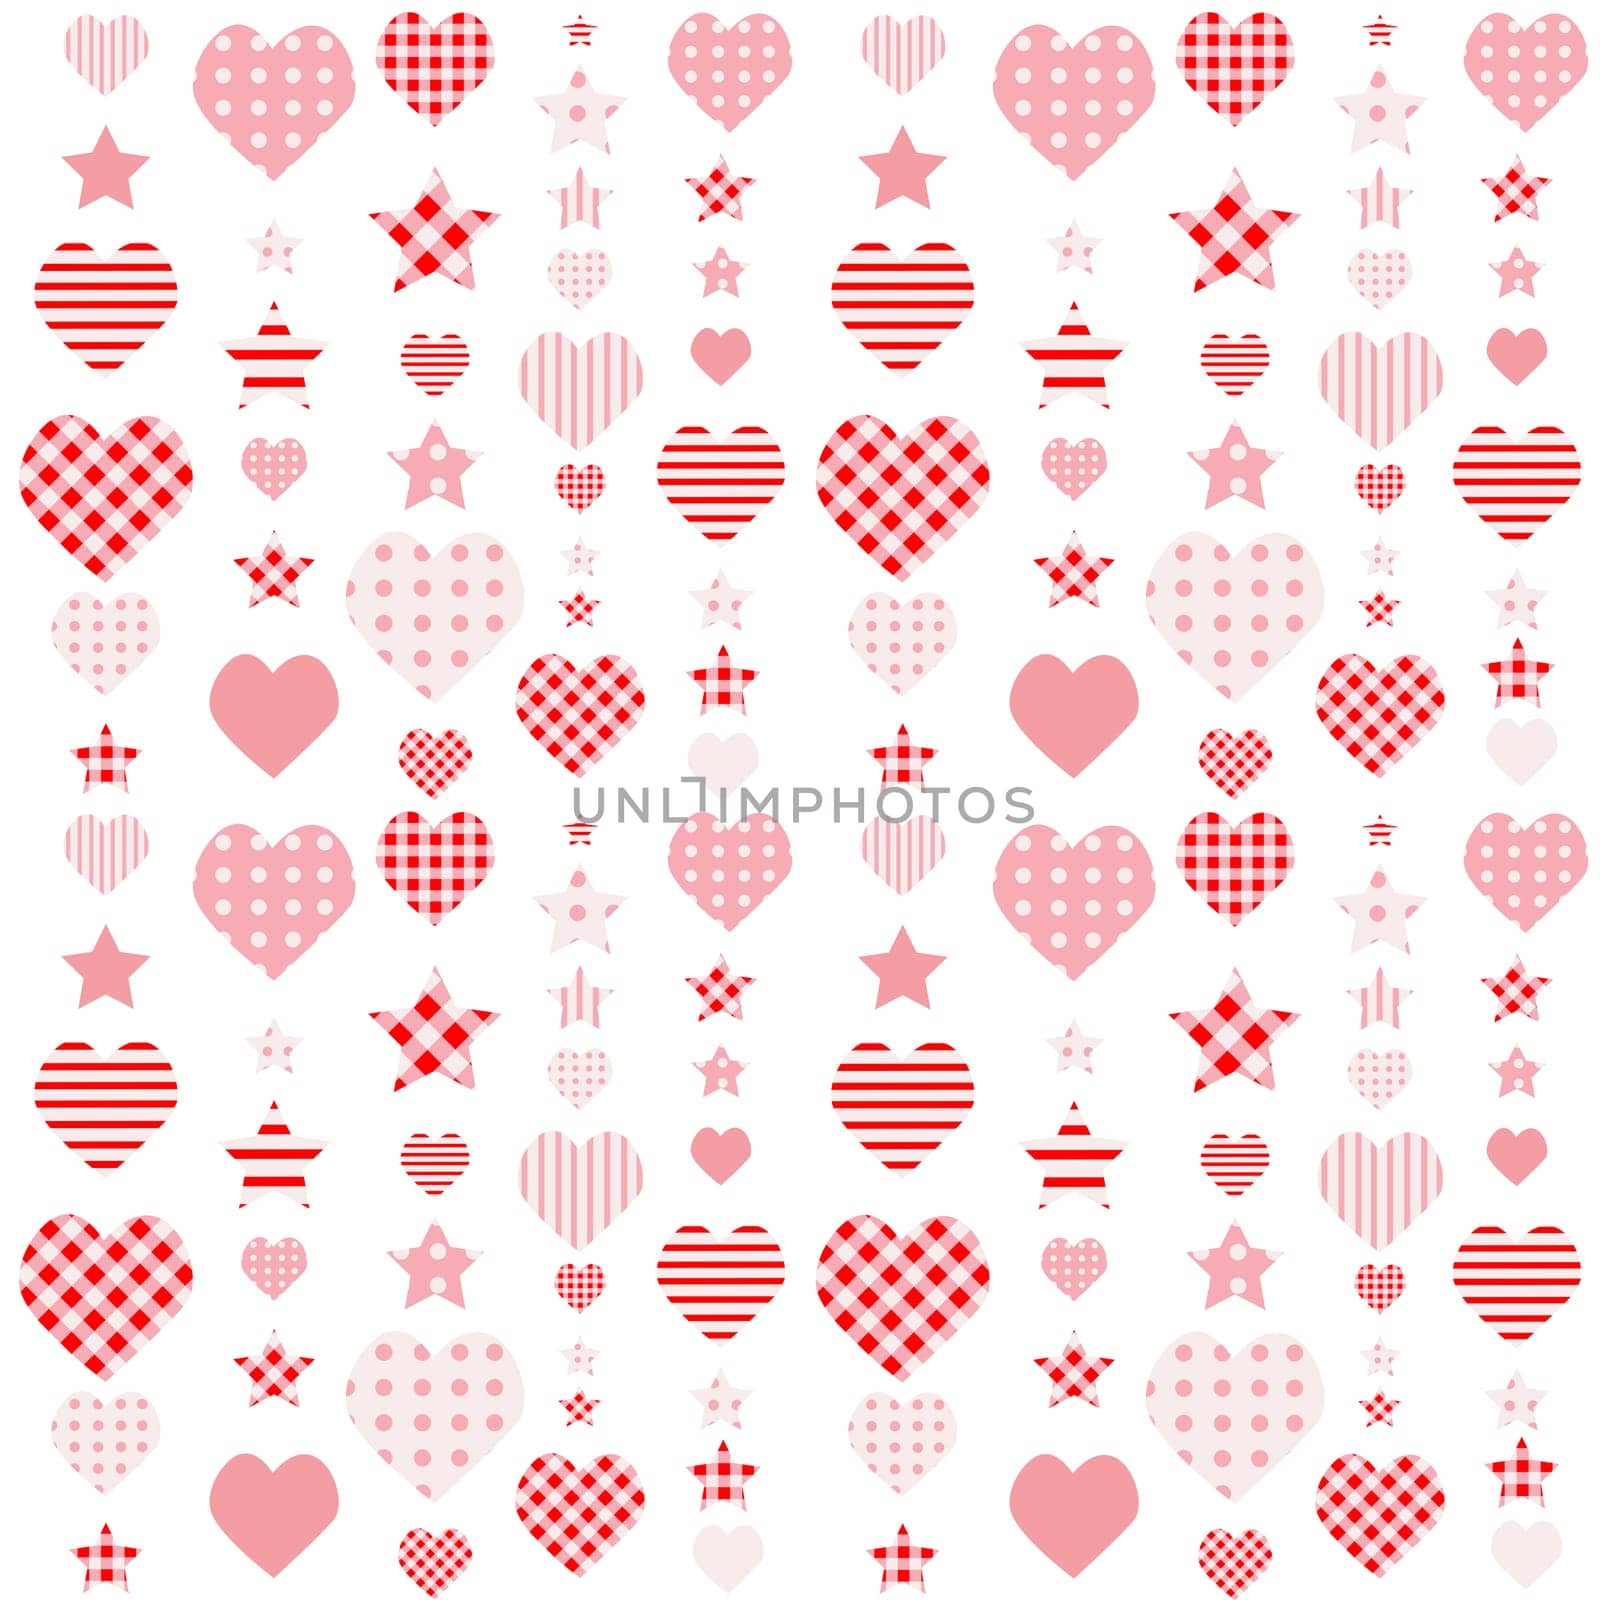 Background with hearts and stars in different prints. by hibrida13